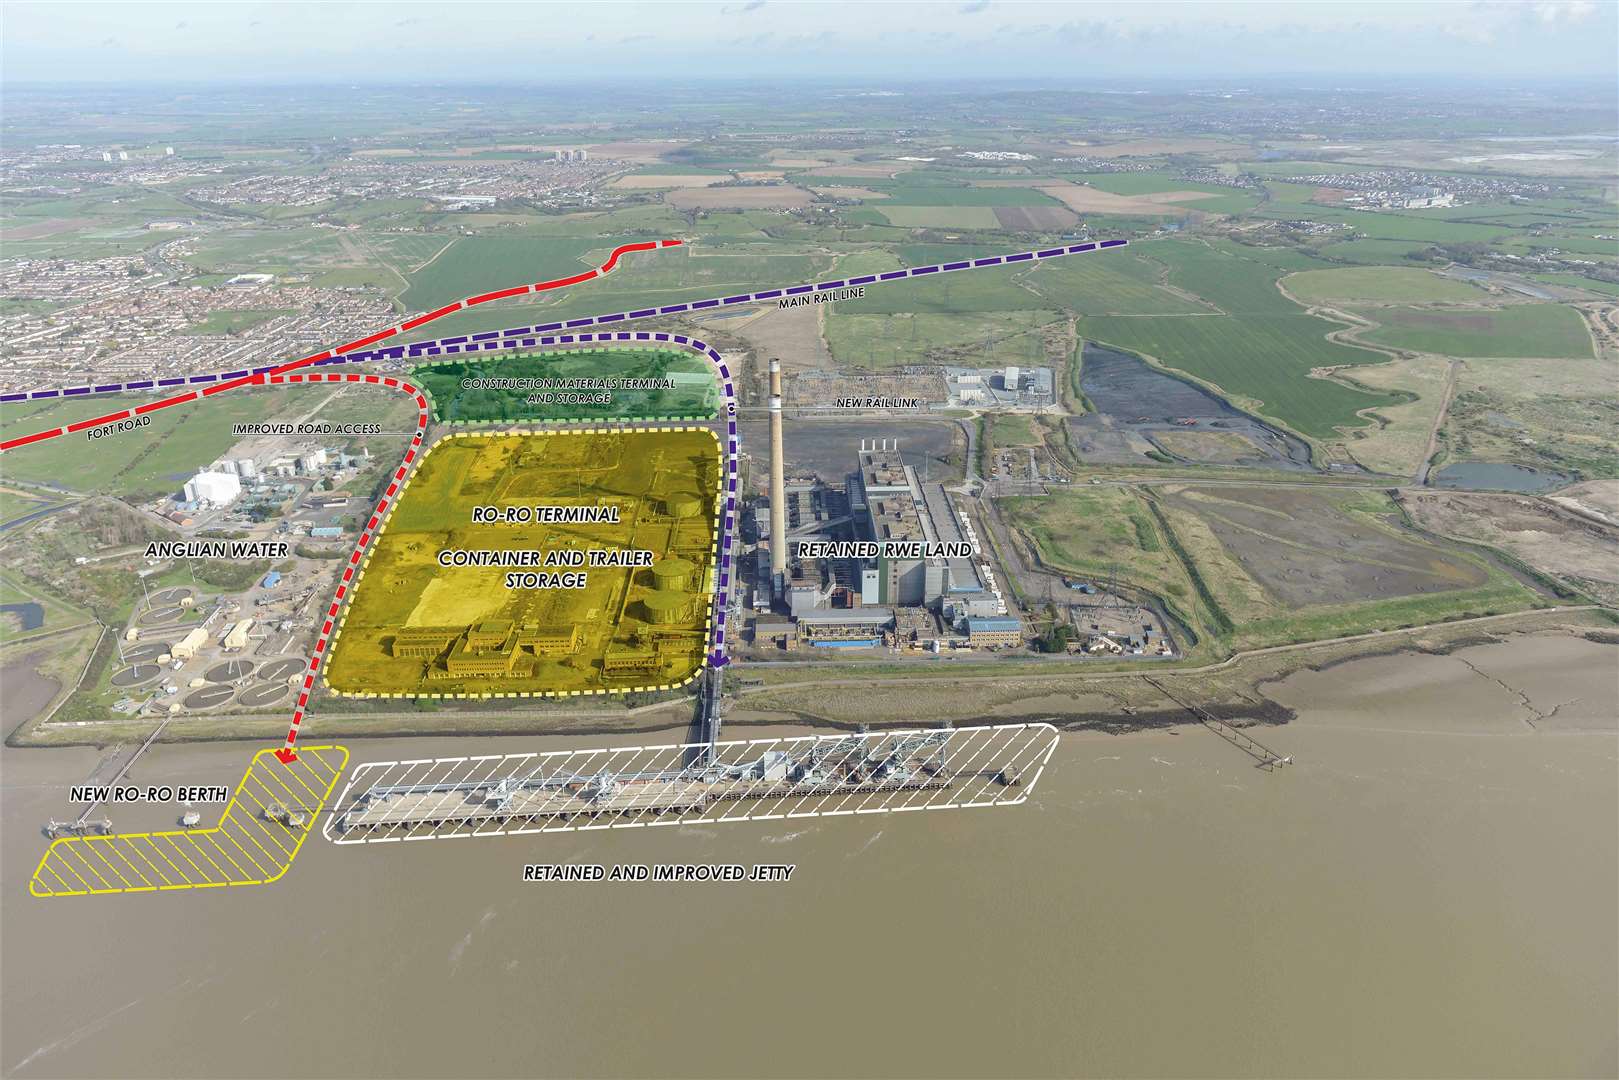 An aerial view shows the proposed layout of Tilbury2